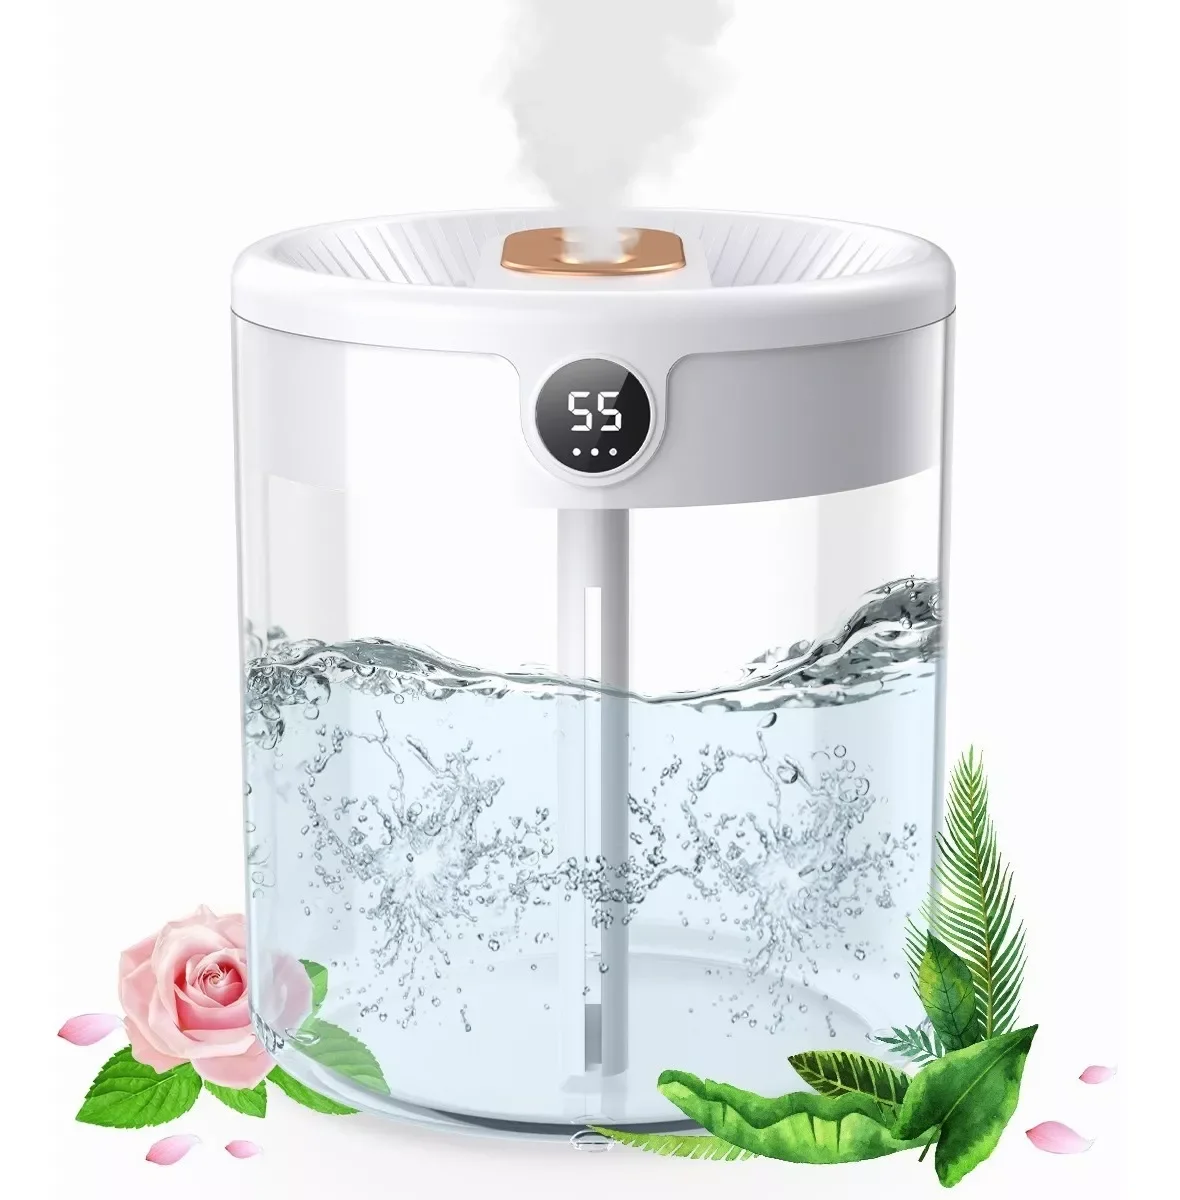 

Humidifiers for Bedroom 2L Cool Mist USB Portable Desk Humidifier Quiet Ultrasonic Humidifier with 2 Mist Modes Auto Shut-Off